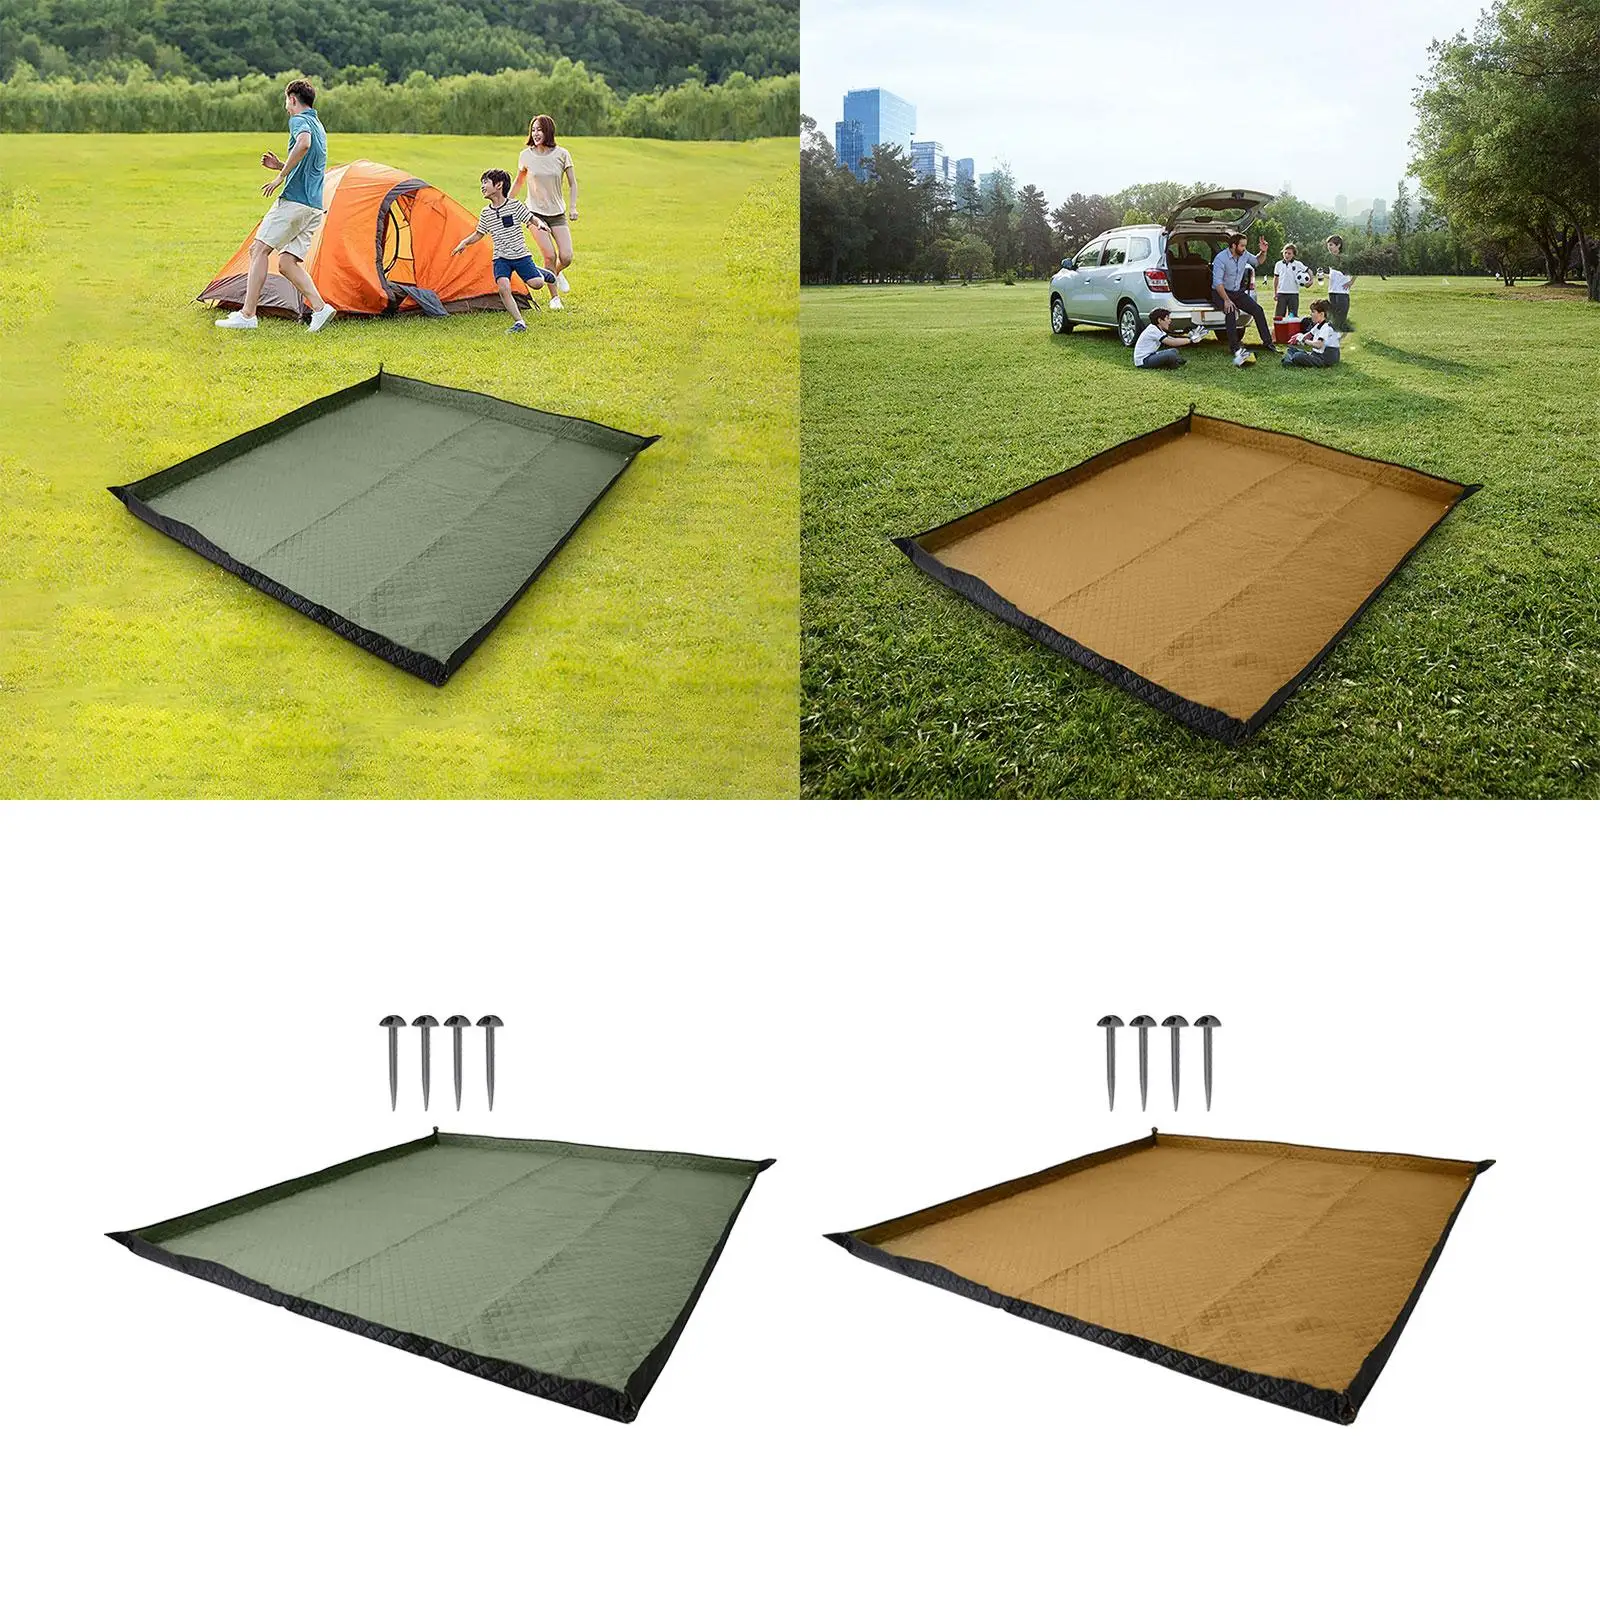 Camping Blanket, Sleeping Mat, Parking Blanket, with Carrying Strap, Tent Pad,